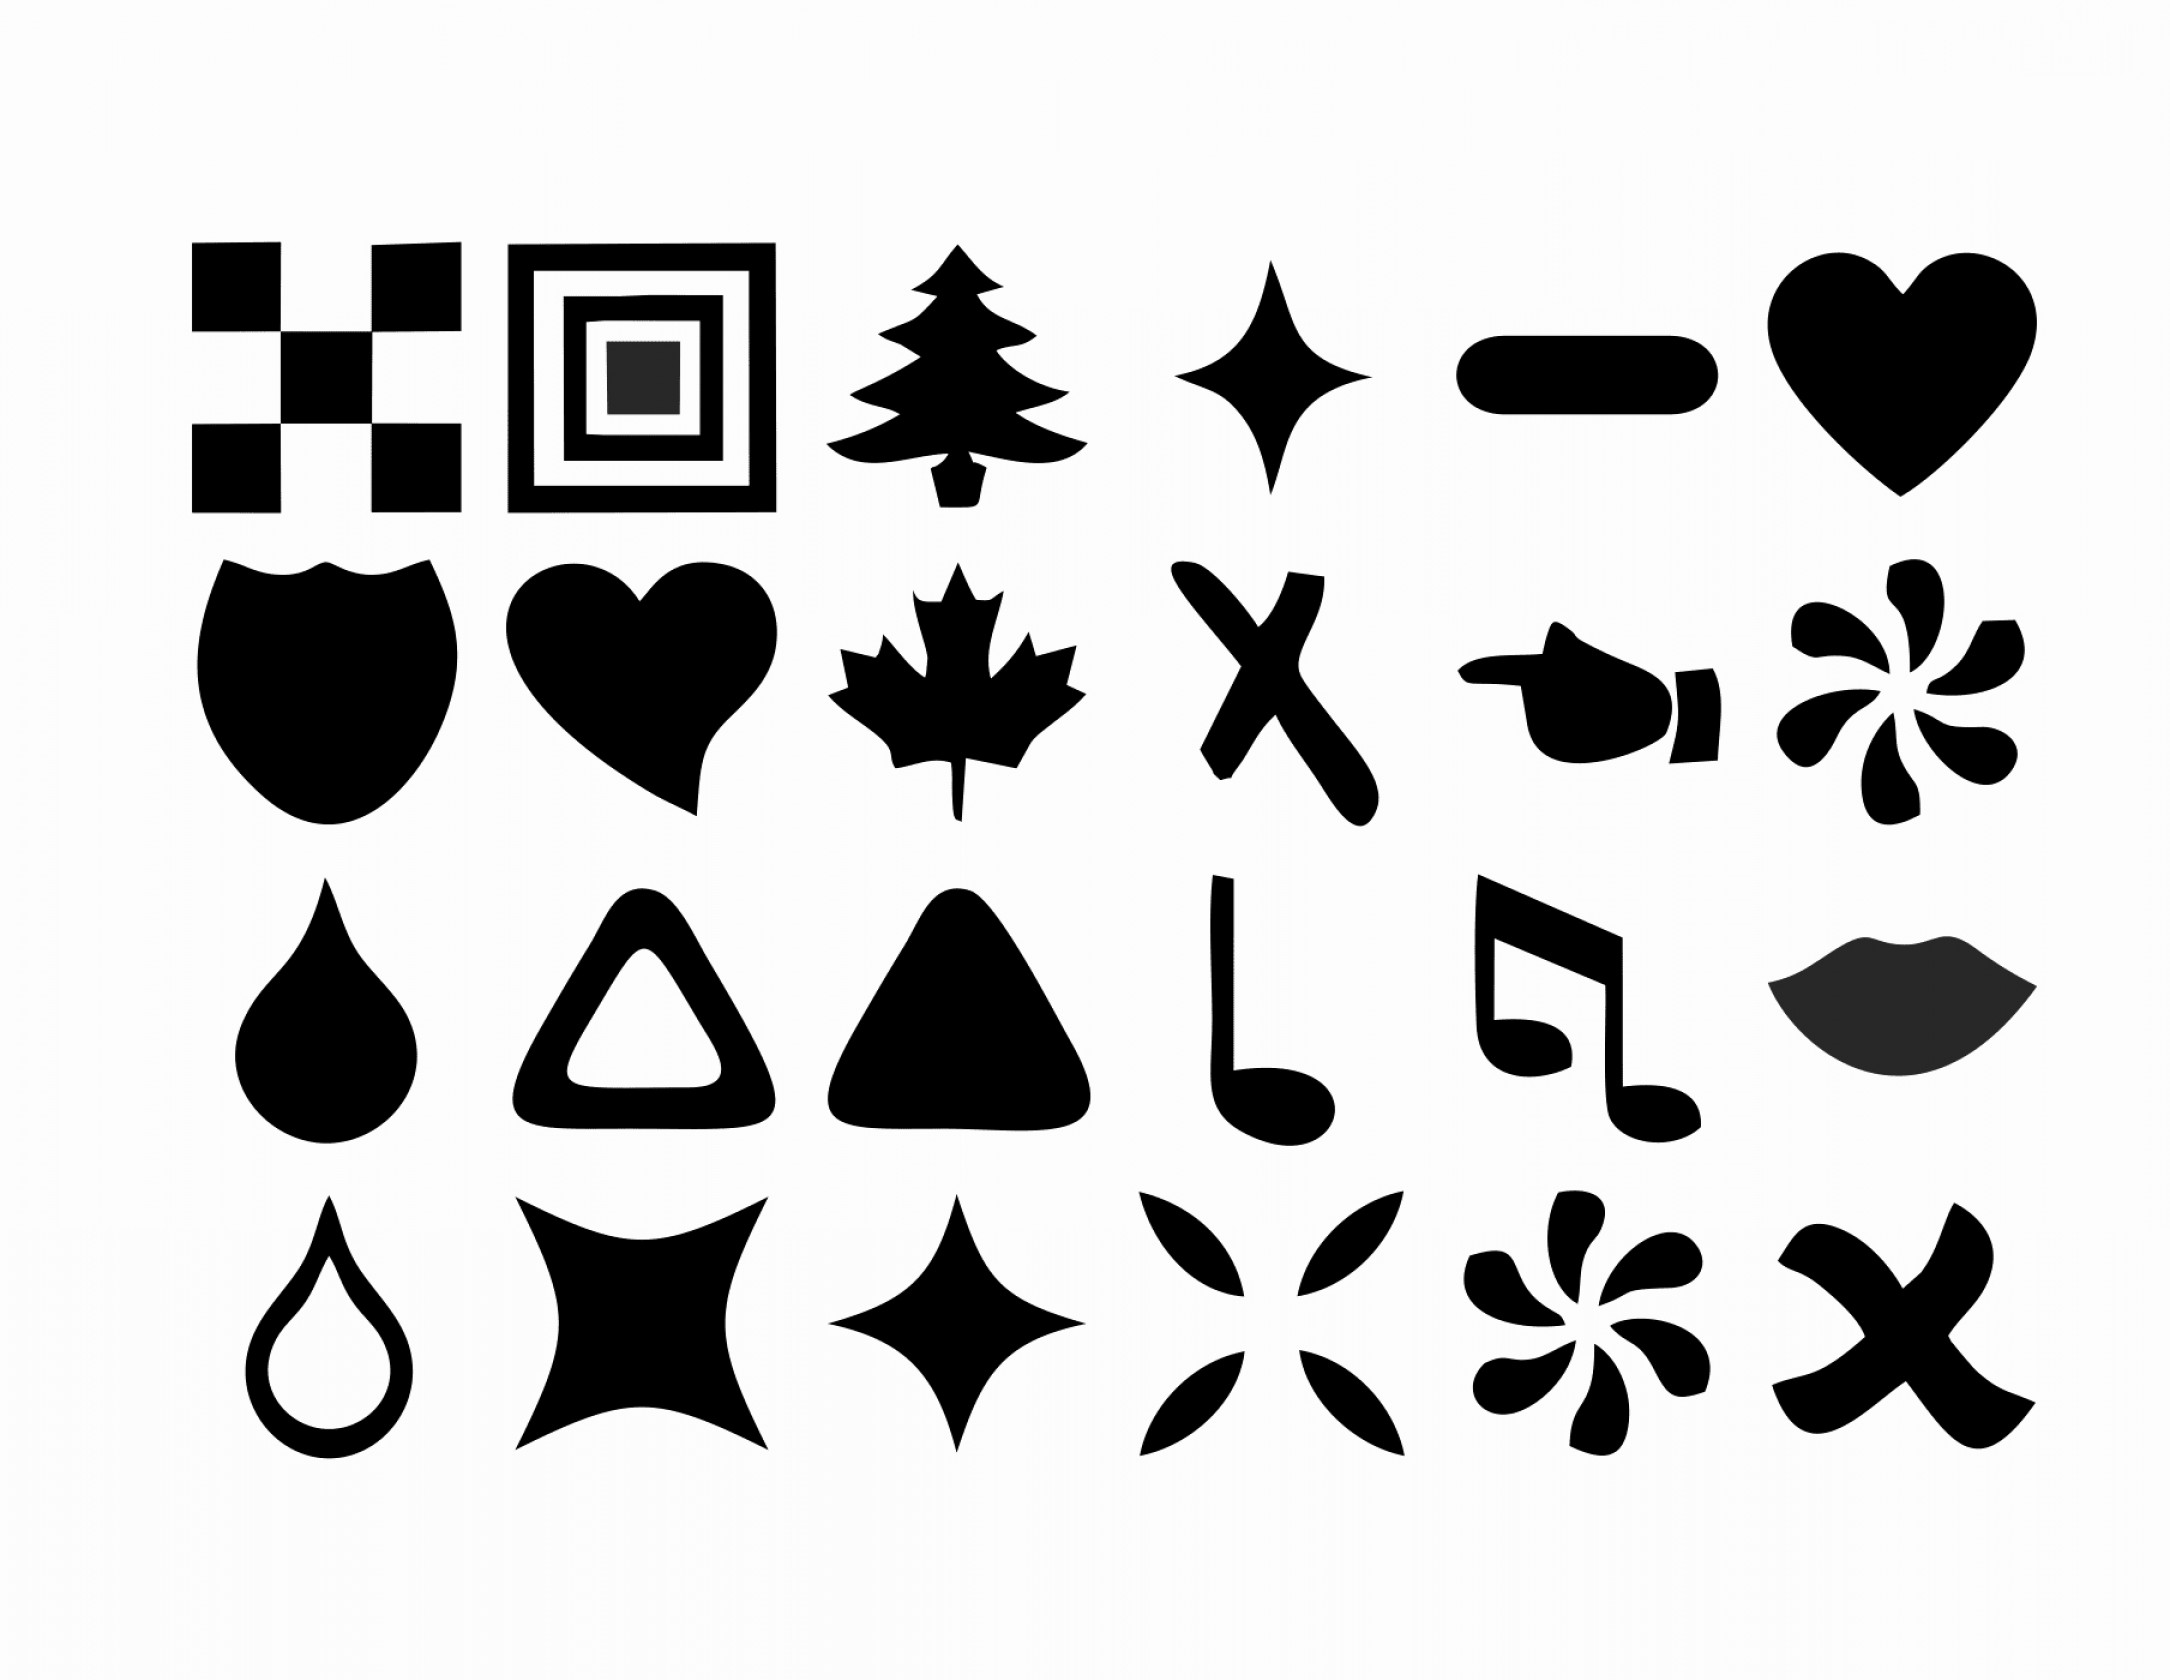 photoshop vector shapes download